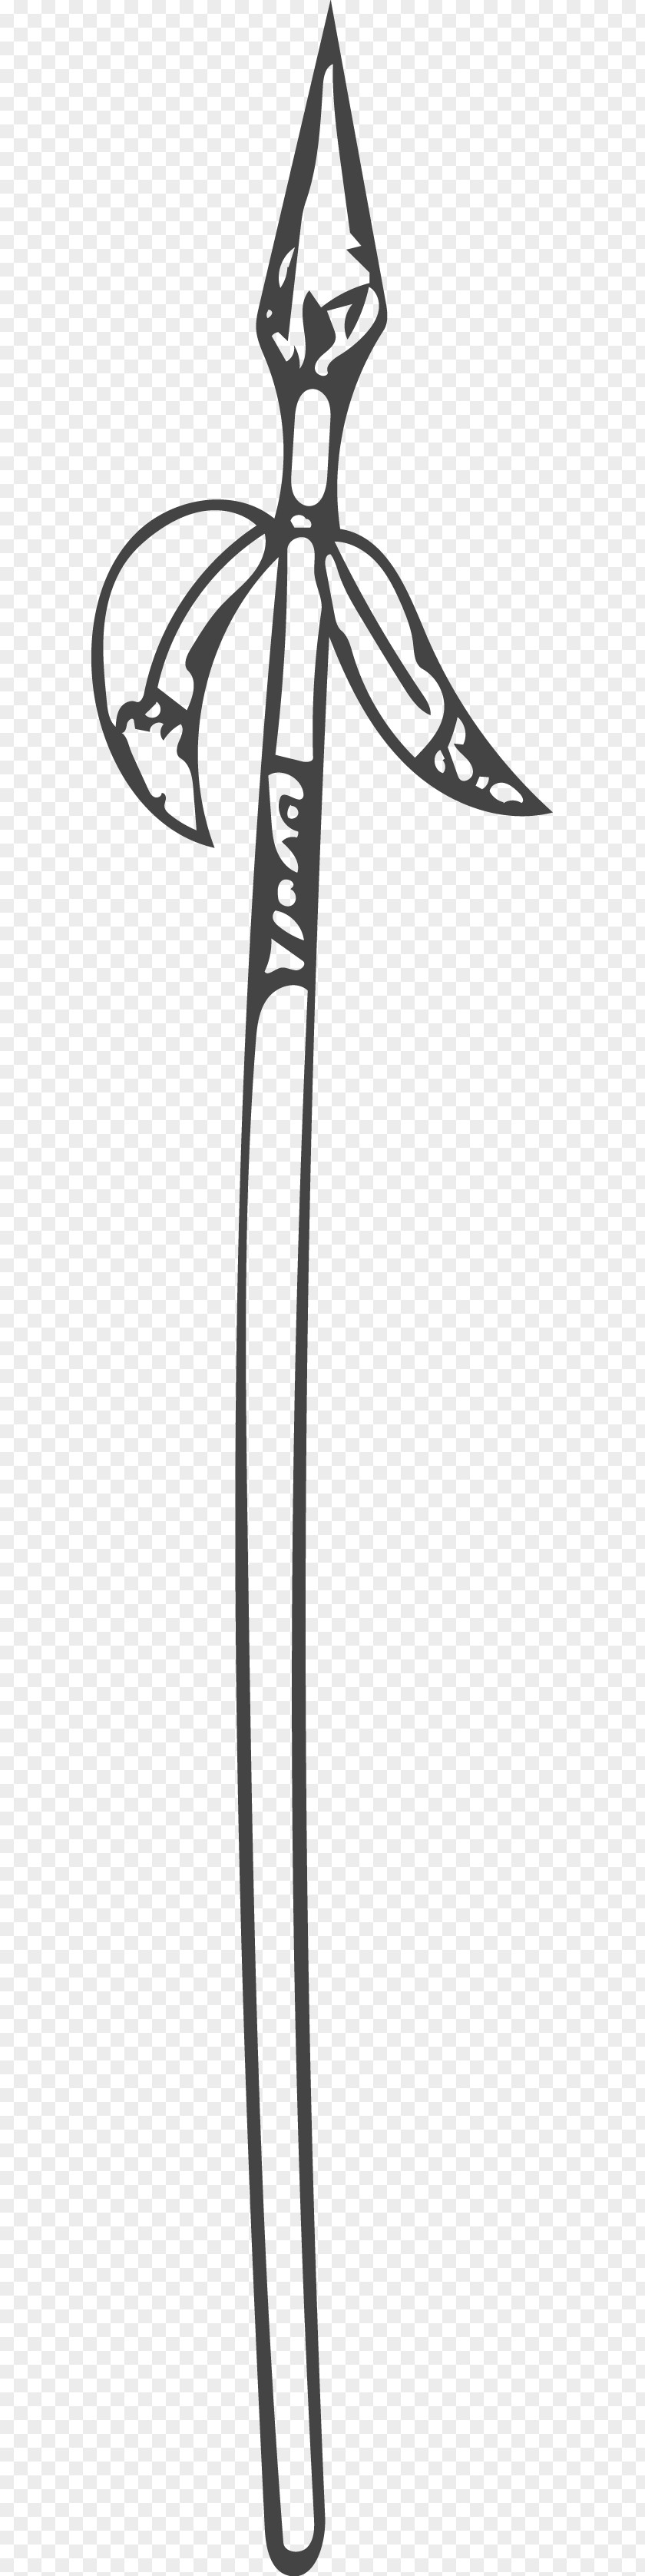 Spear Vector Drawing Black And White Pencil PNG